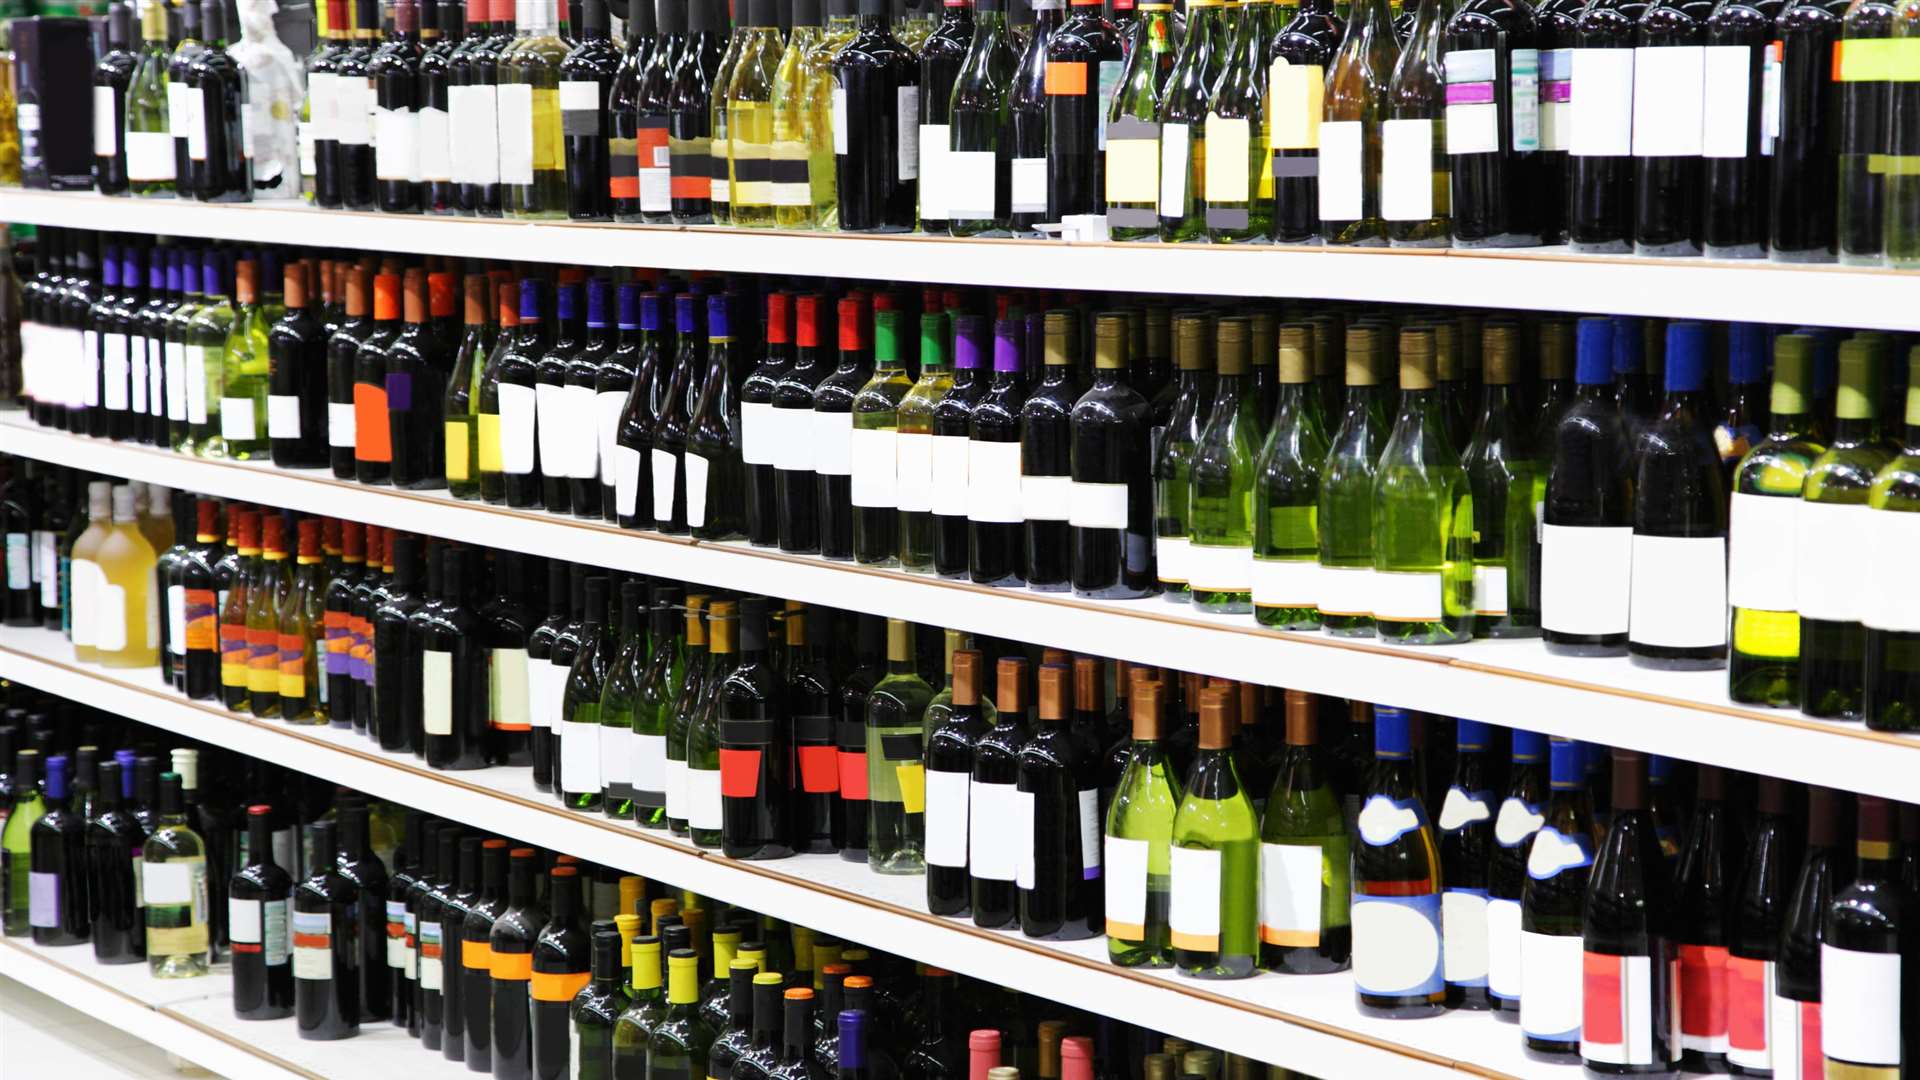 The man has been sentenced to 60 days in jail after stealing alcohol from a store